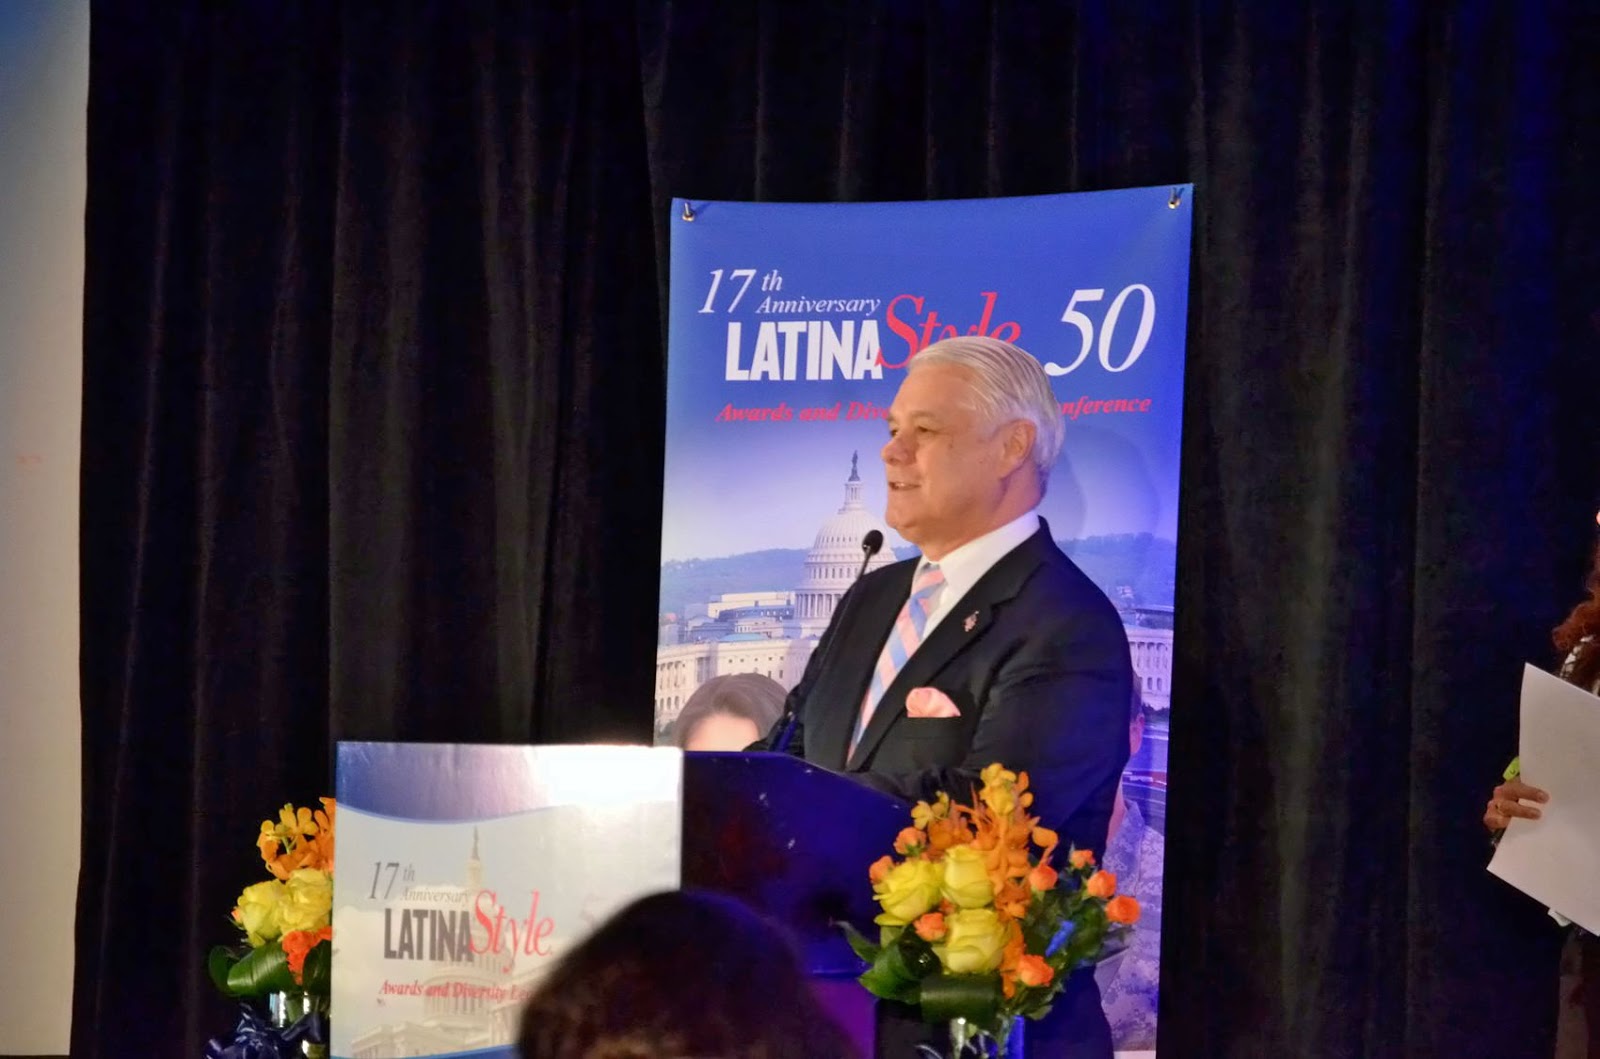 LATINA Style 50 Awards and Diversity Leaders Conference